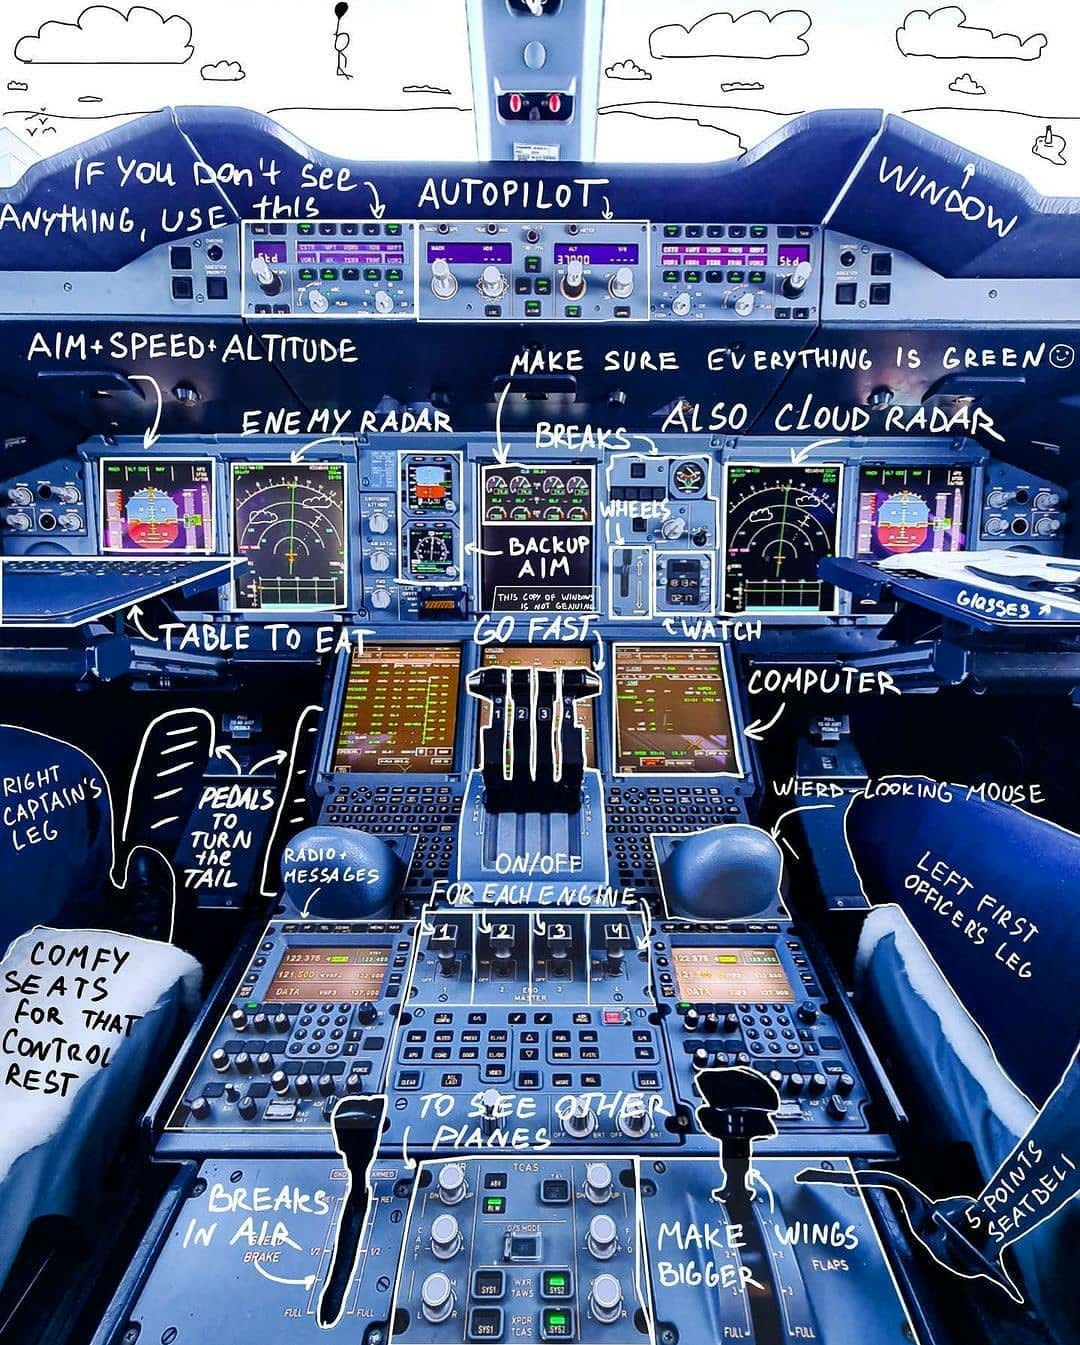 Annotated photo of an A380 cockpit